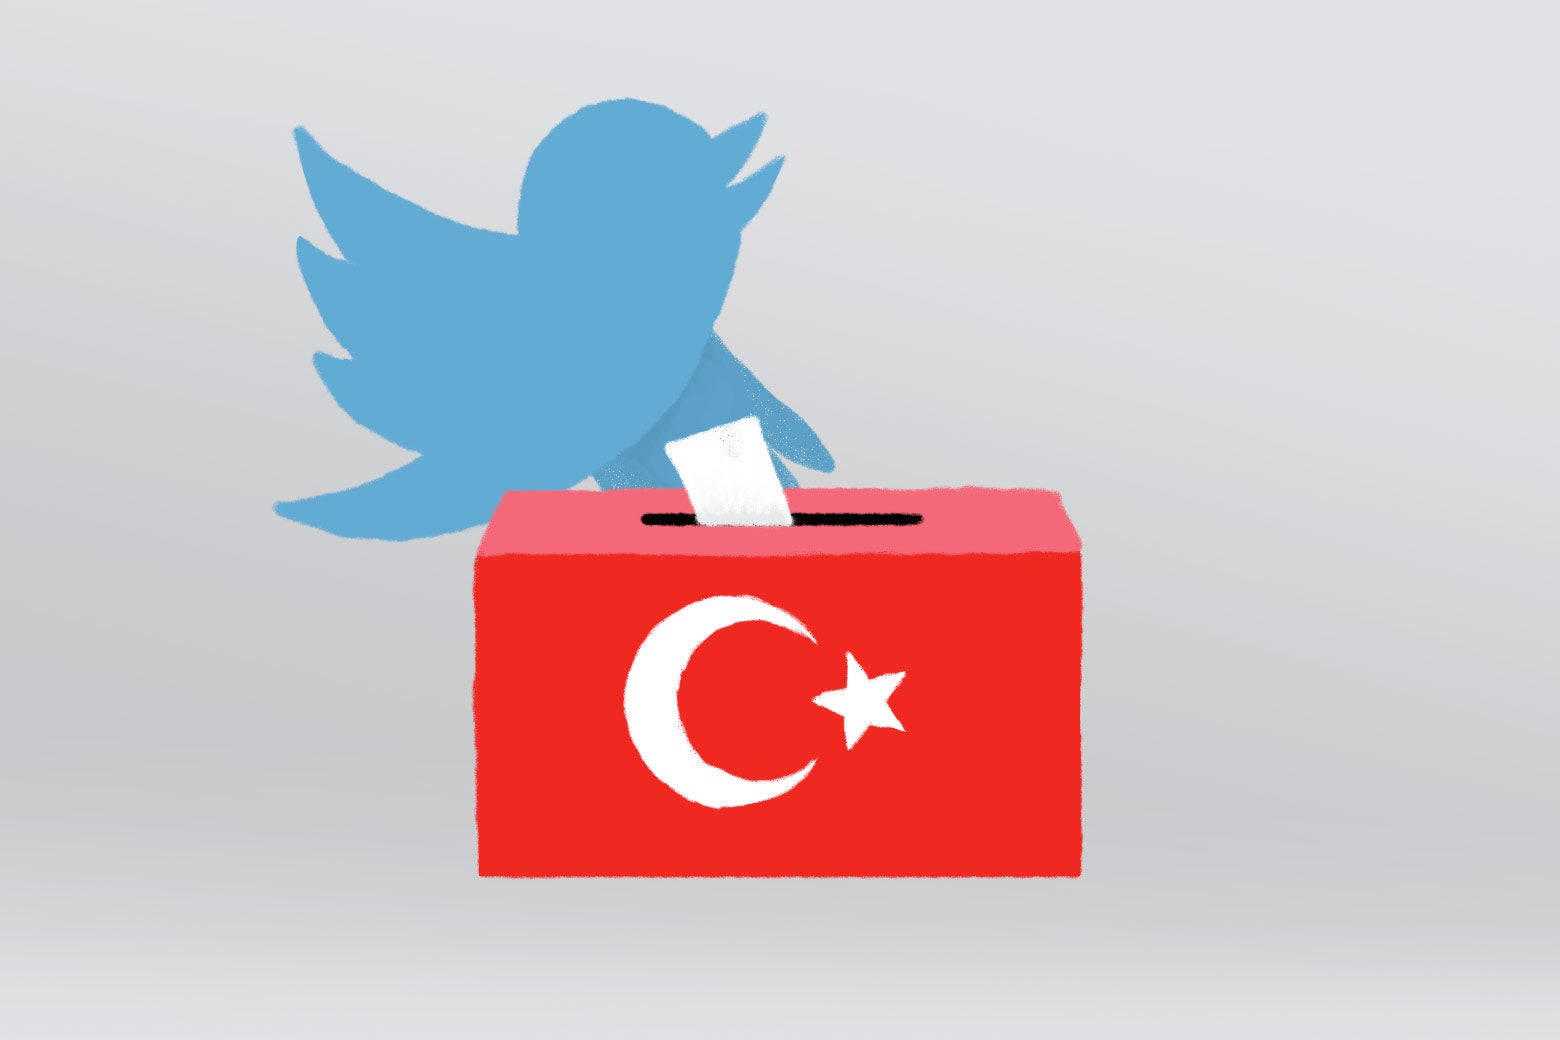 The blue Twitter bird drops a voting ballot into a red ballot box with the Turkish flag on it. 